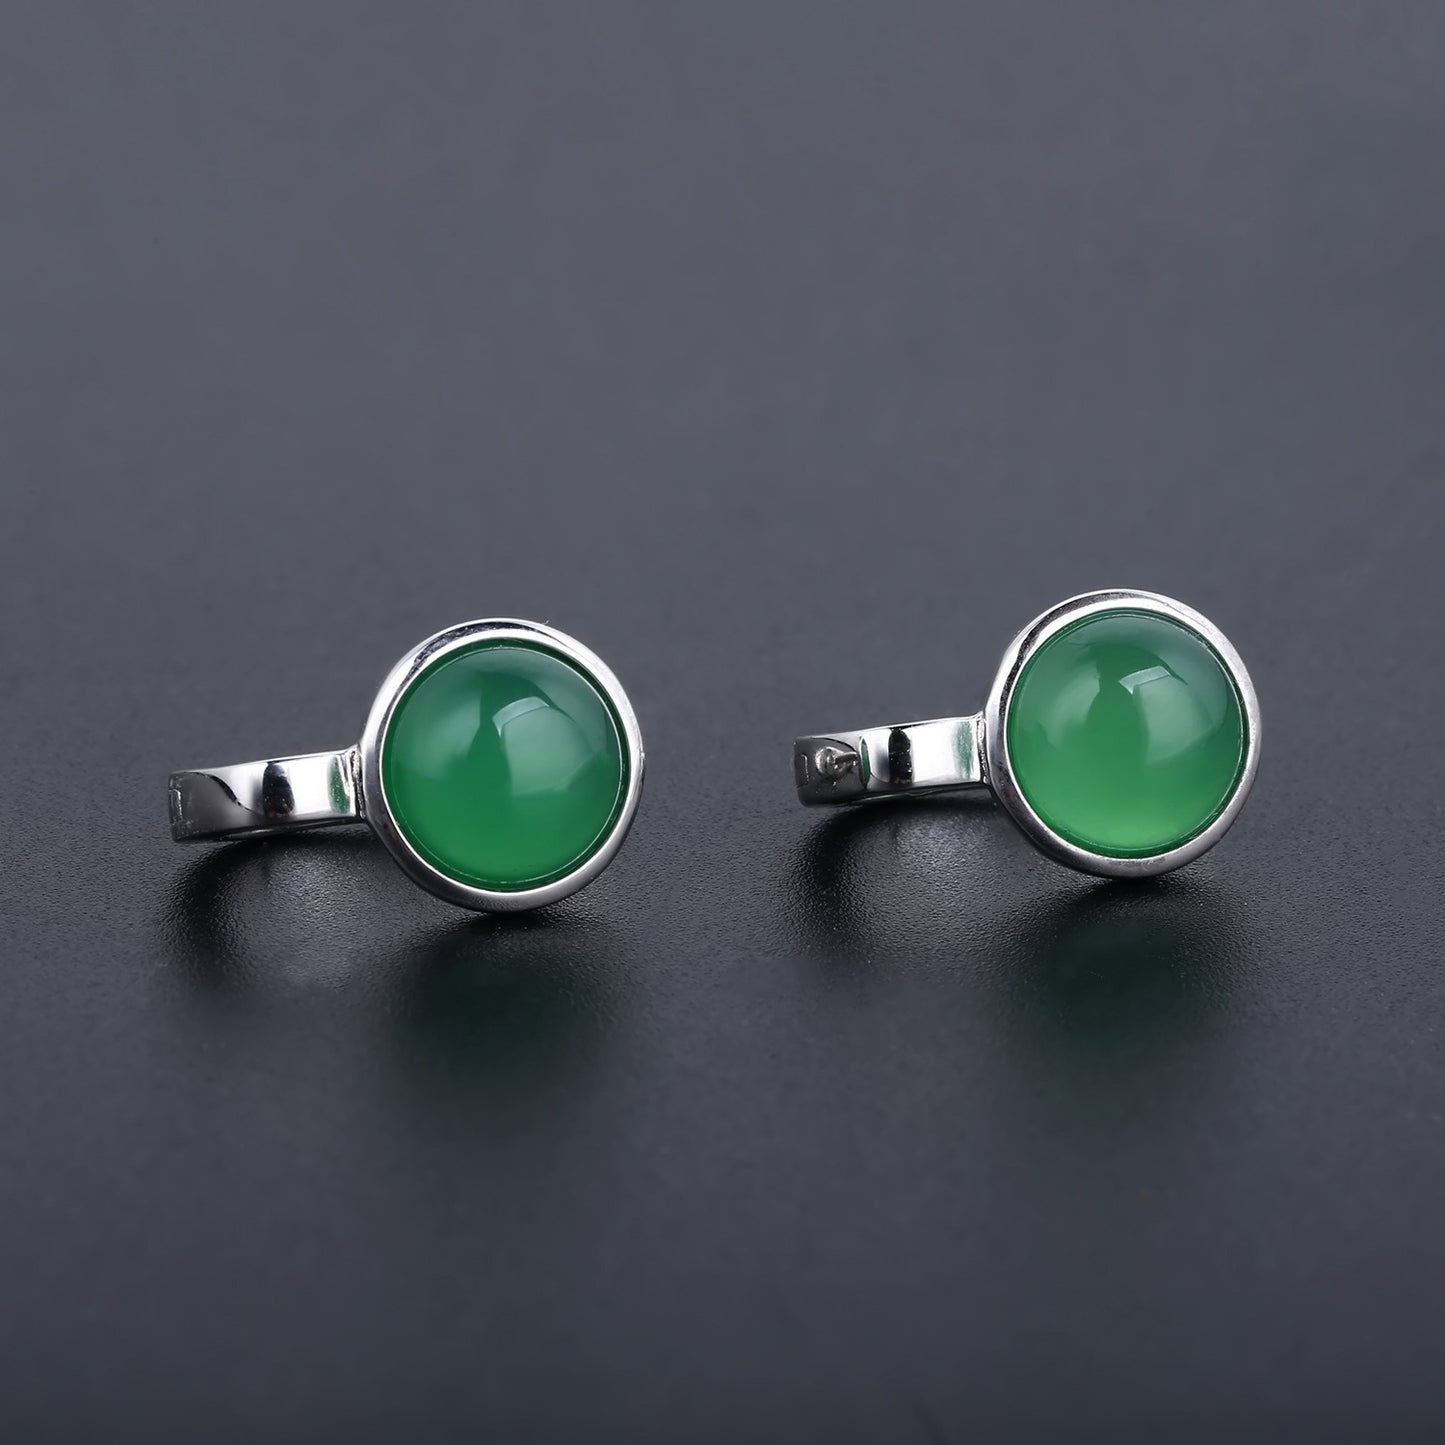 European Natural Green Agate Solitaire Round Cut Sterling Silver Studs Earrings for Women